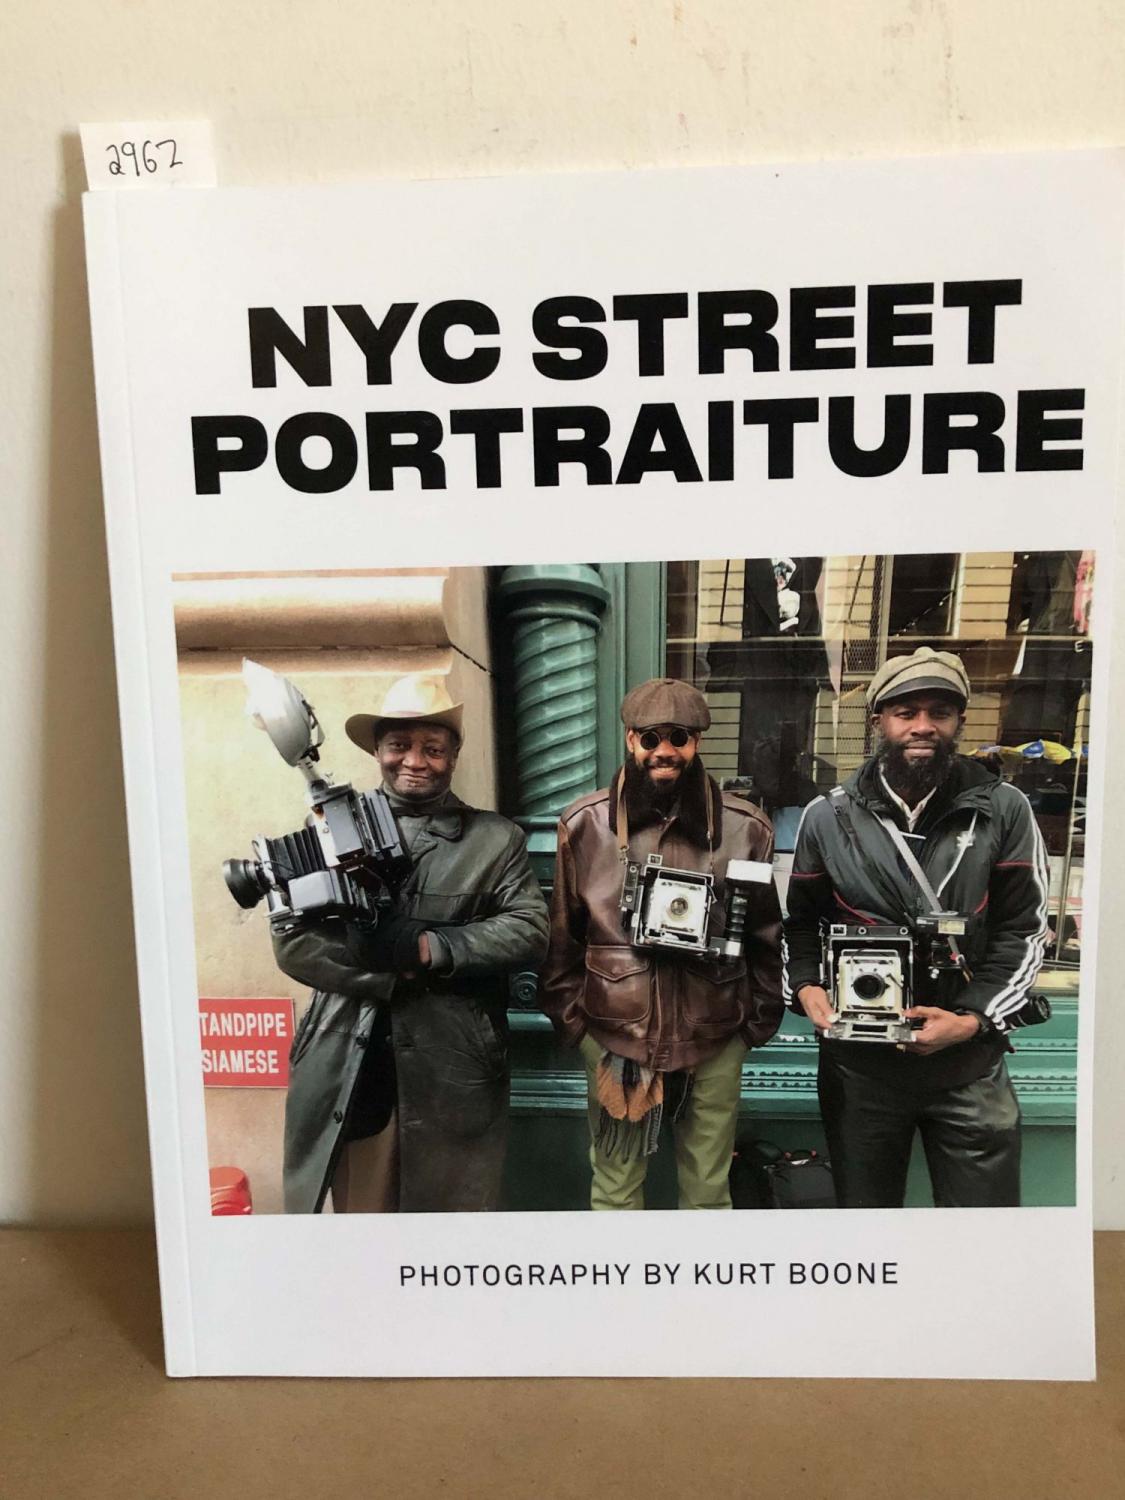 Details about   "NYC STREET PORTRAITURE" BY KURT BOONE:      NEW YORK CITY STREET PHOTOGRAPHY 